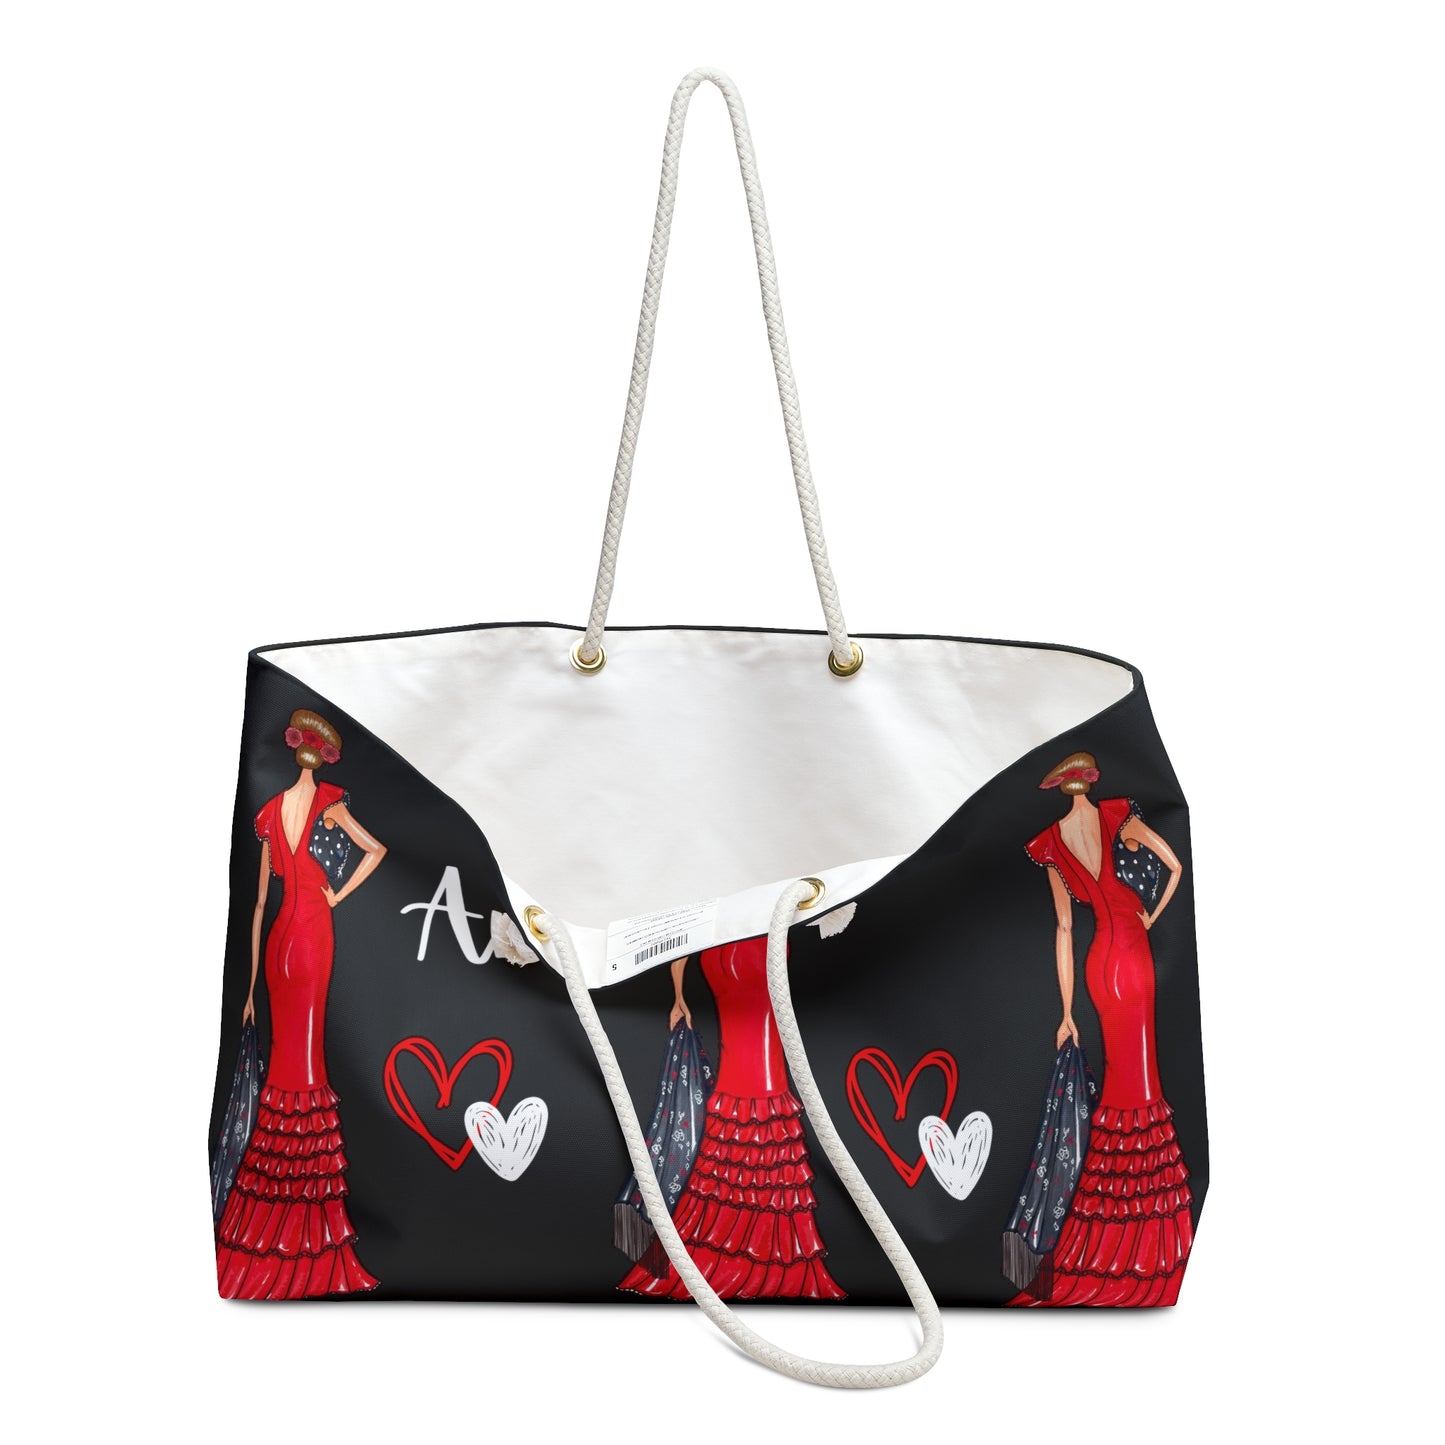 a handbag with a woman in a red dress on it